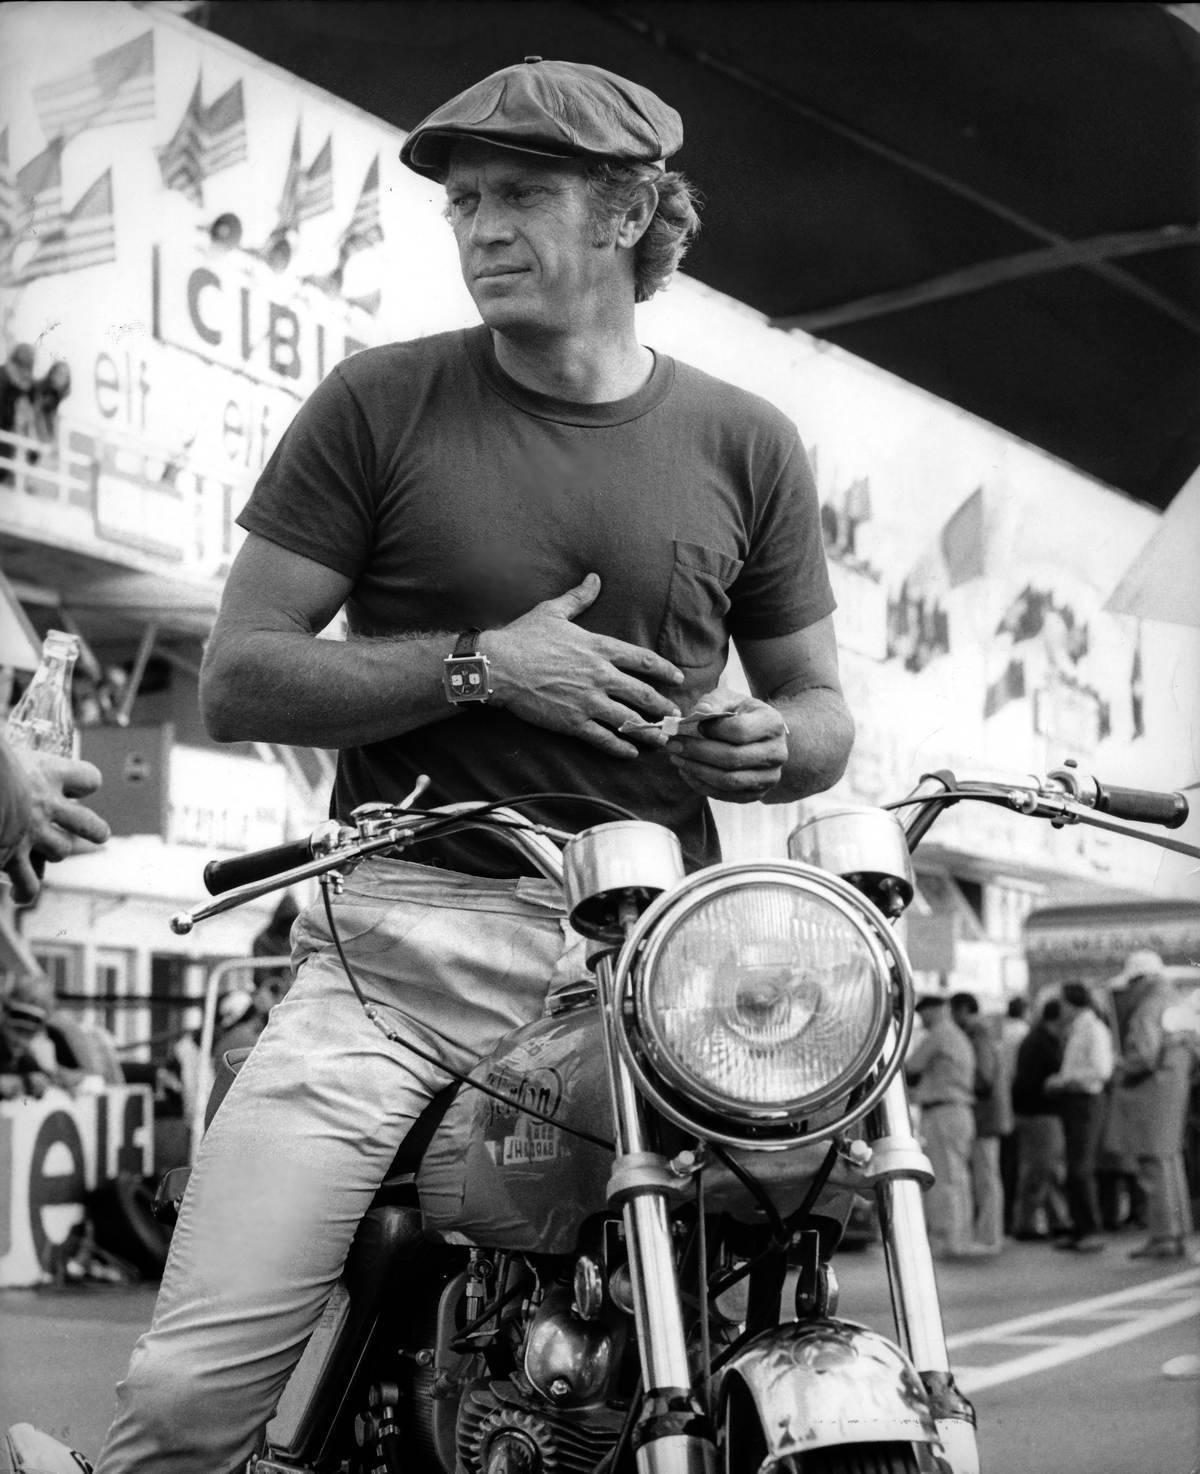 1960’s original photo, Steve McQueen on a motorcycle.